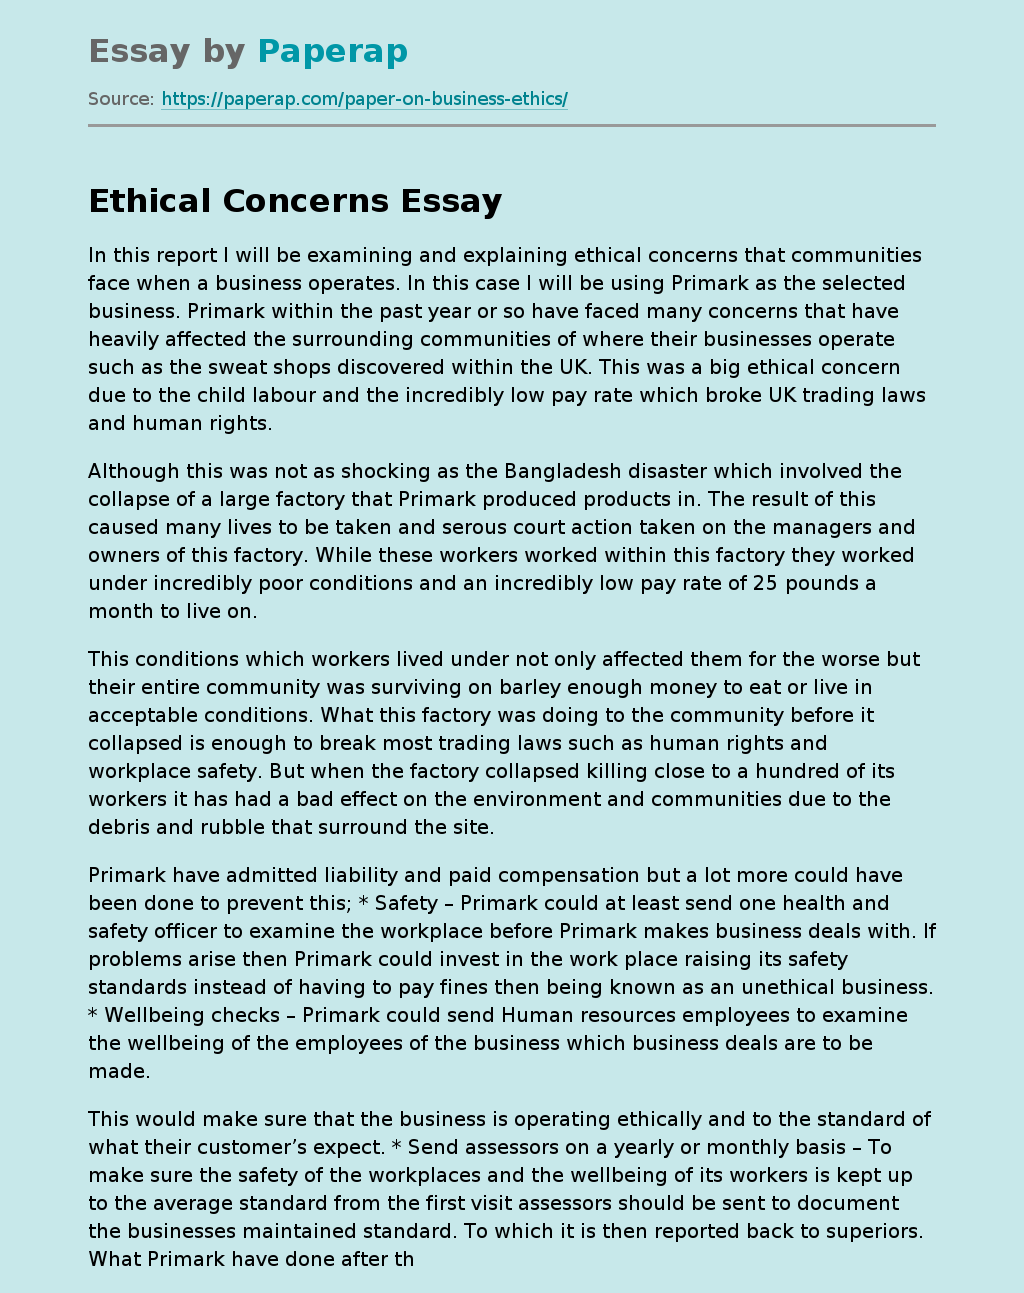 Ethical Issues in the Primemark Market